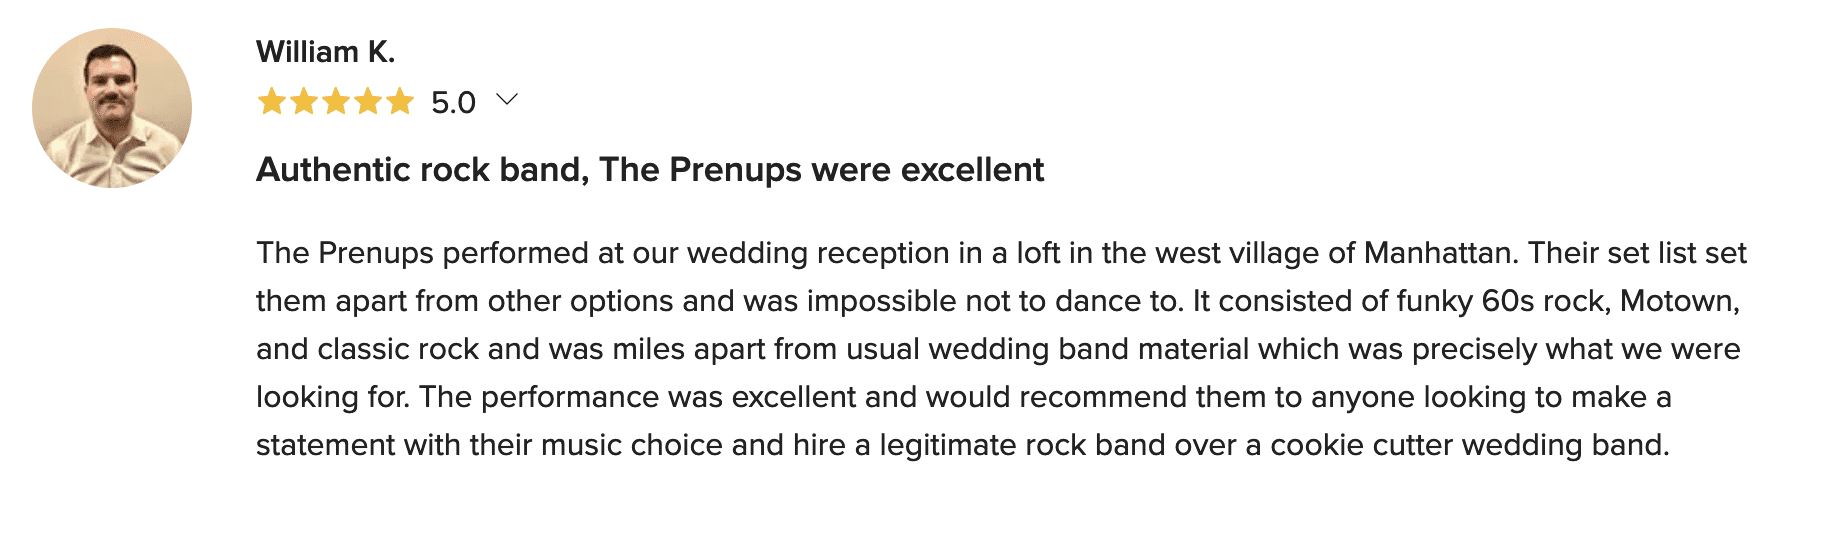 PreNups Best Band Review